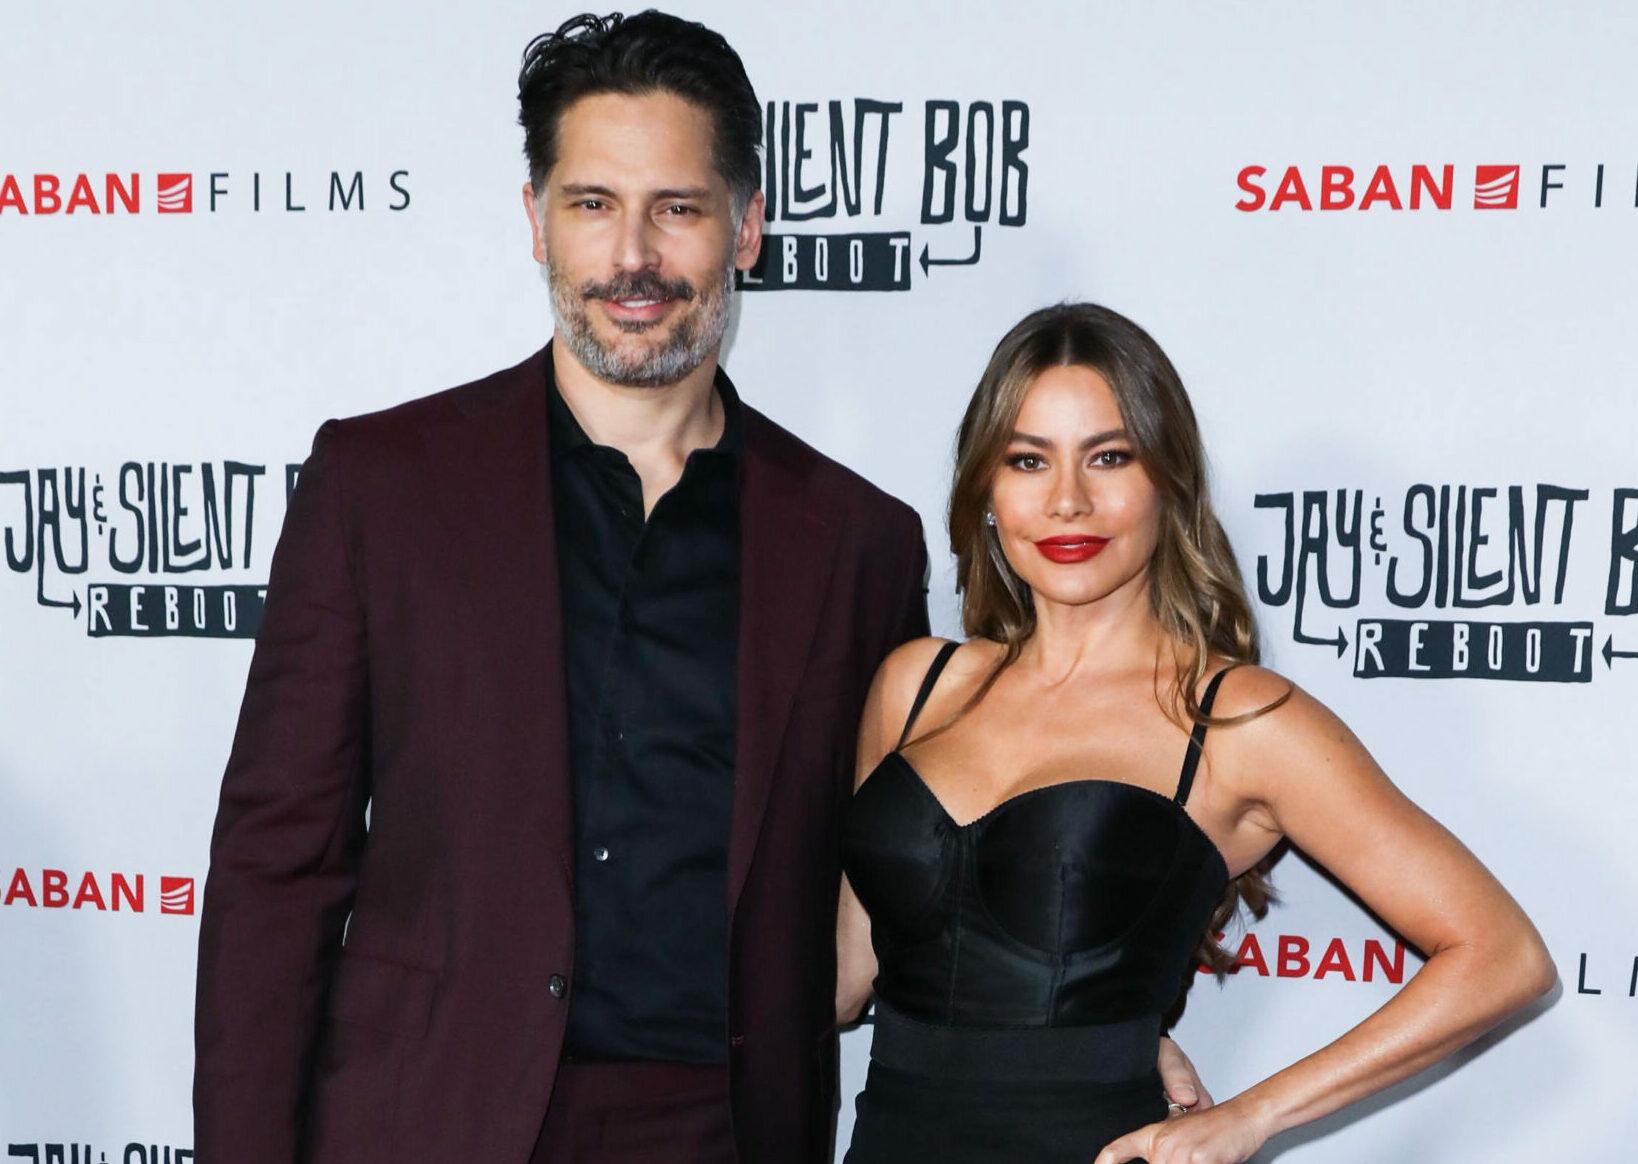 Los Angeles Premiere Of Saban Films' 'Jay and Silent Bob Reboot' held at the TCL Chinese Theatre IMAX on October 14, 2019 in Hollywood, Los Angeles, California, United States. 14 Oct 2019 Pictured: Joe Manganiello, Sofia Vergara.